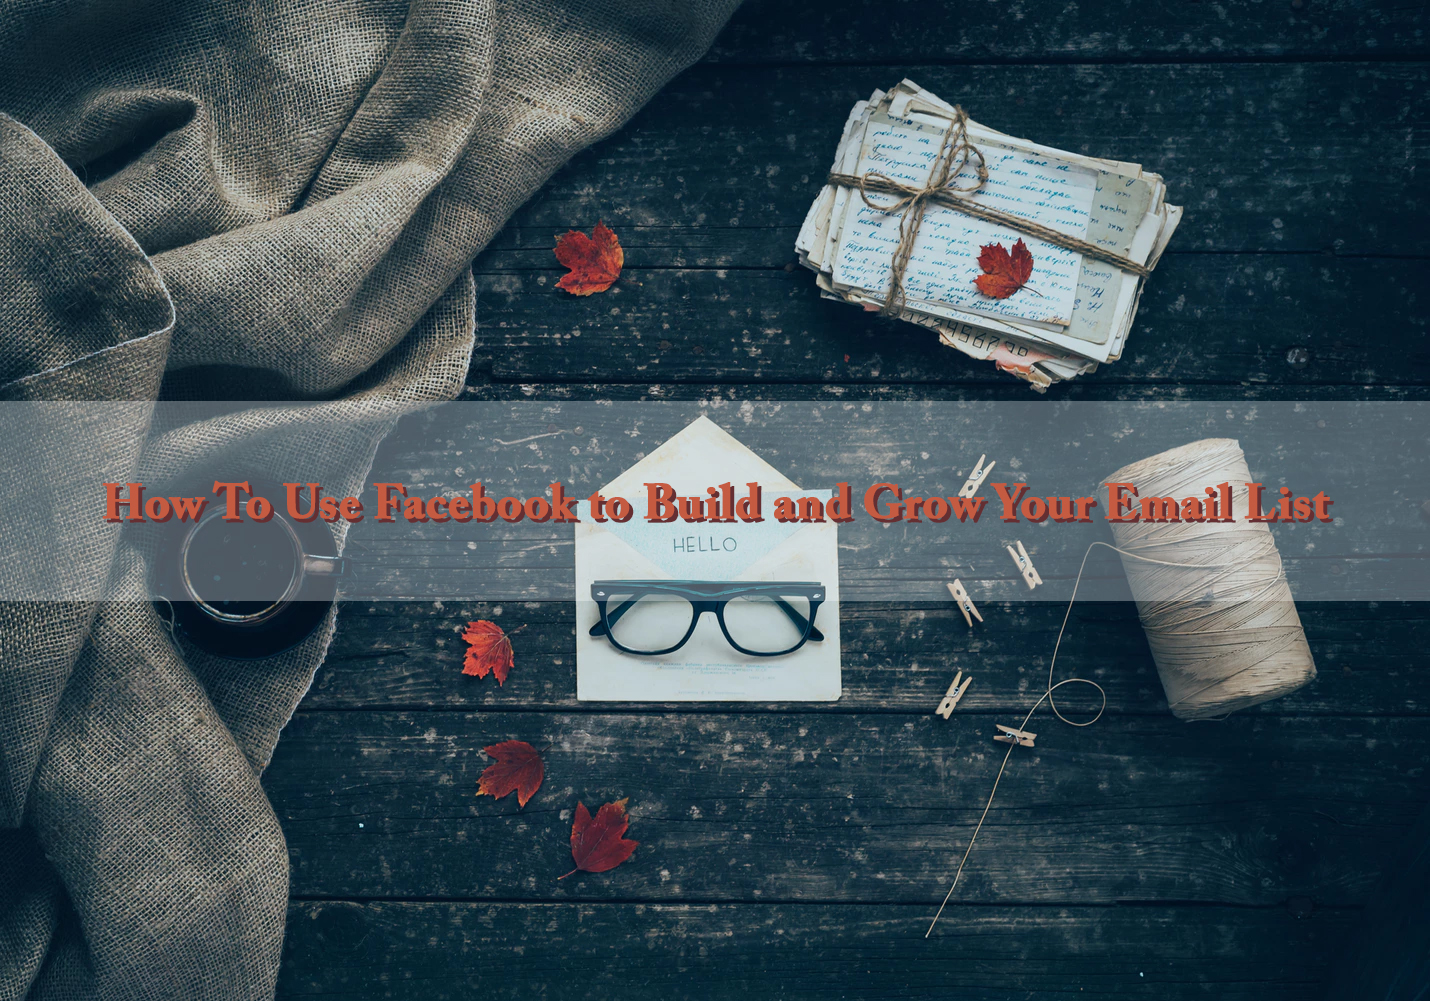 Build and Grow Your Email List with Facebook Marketing